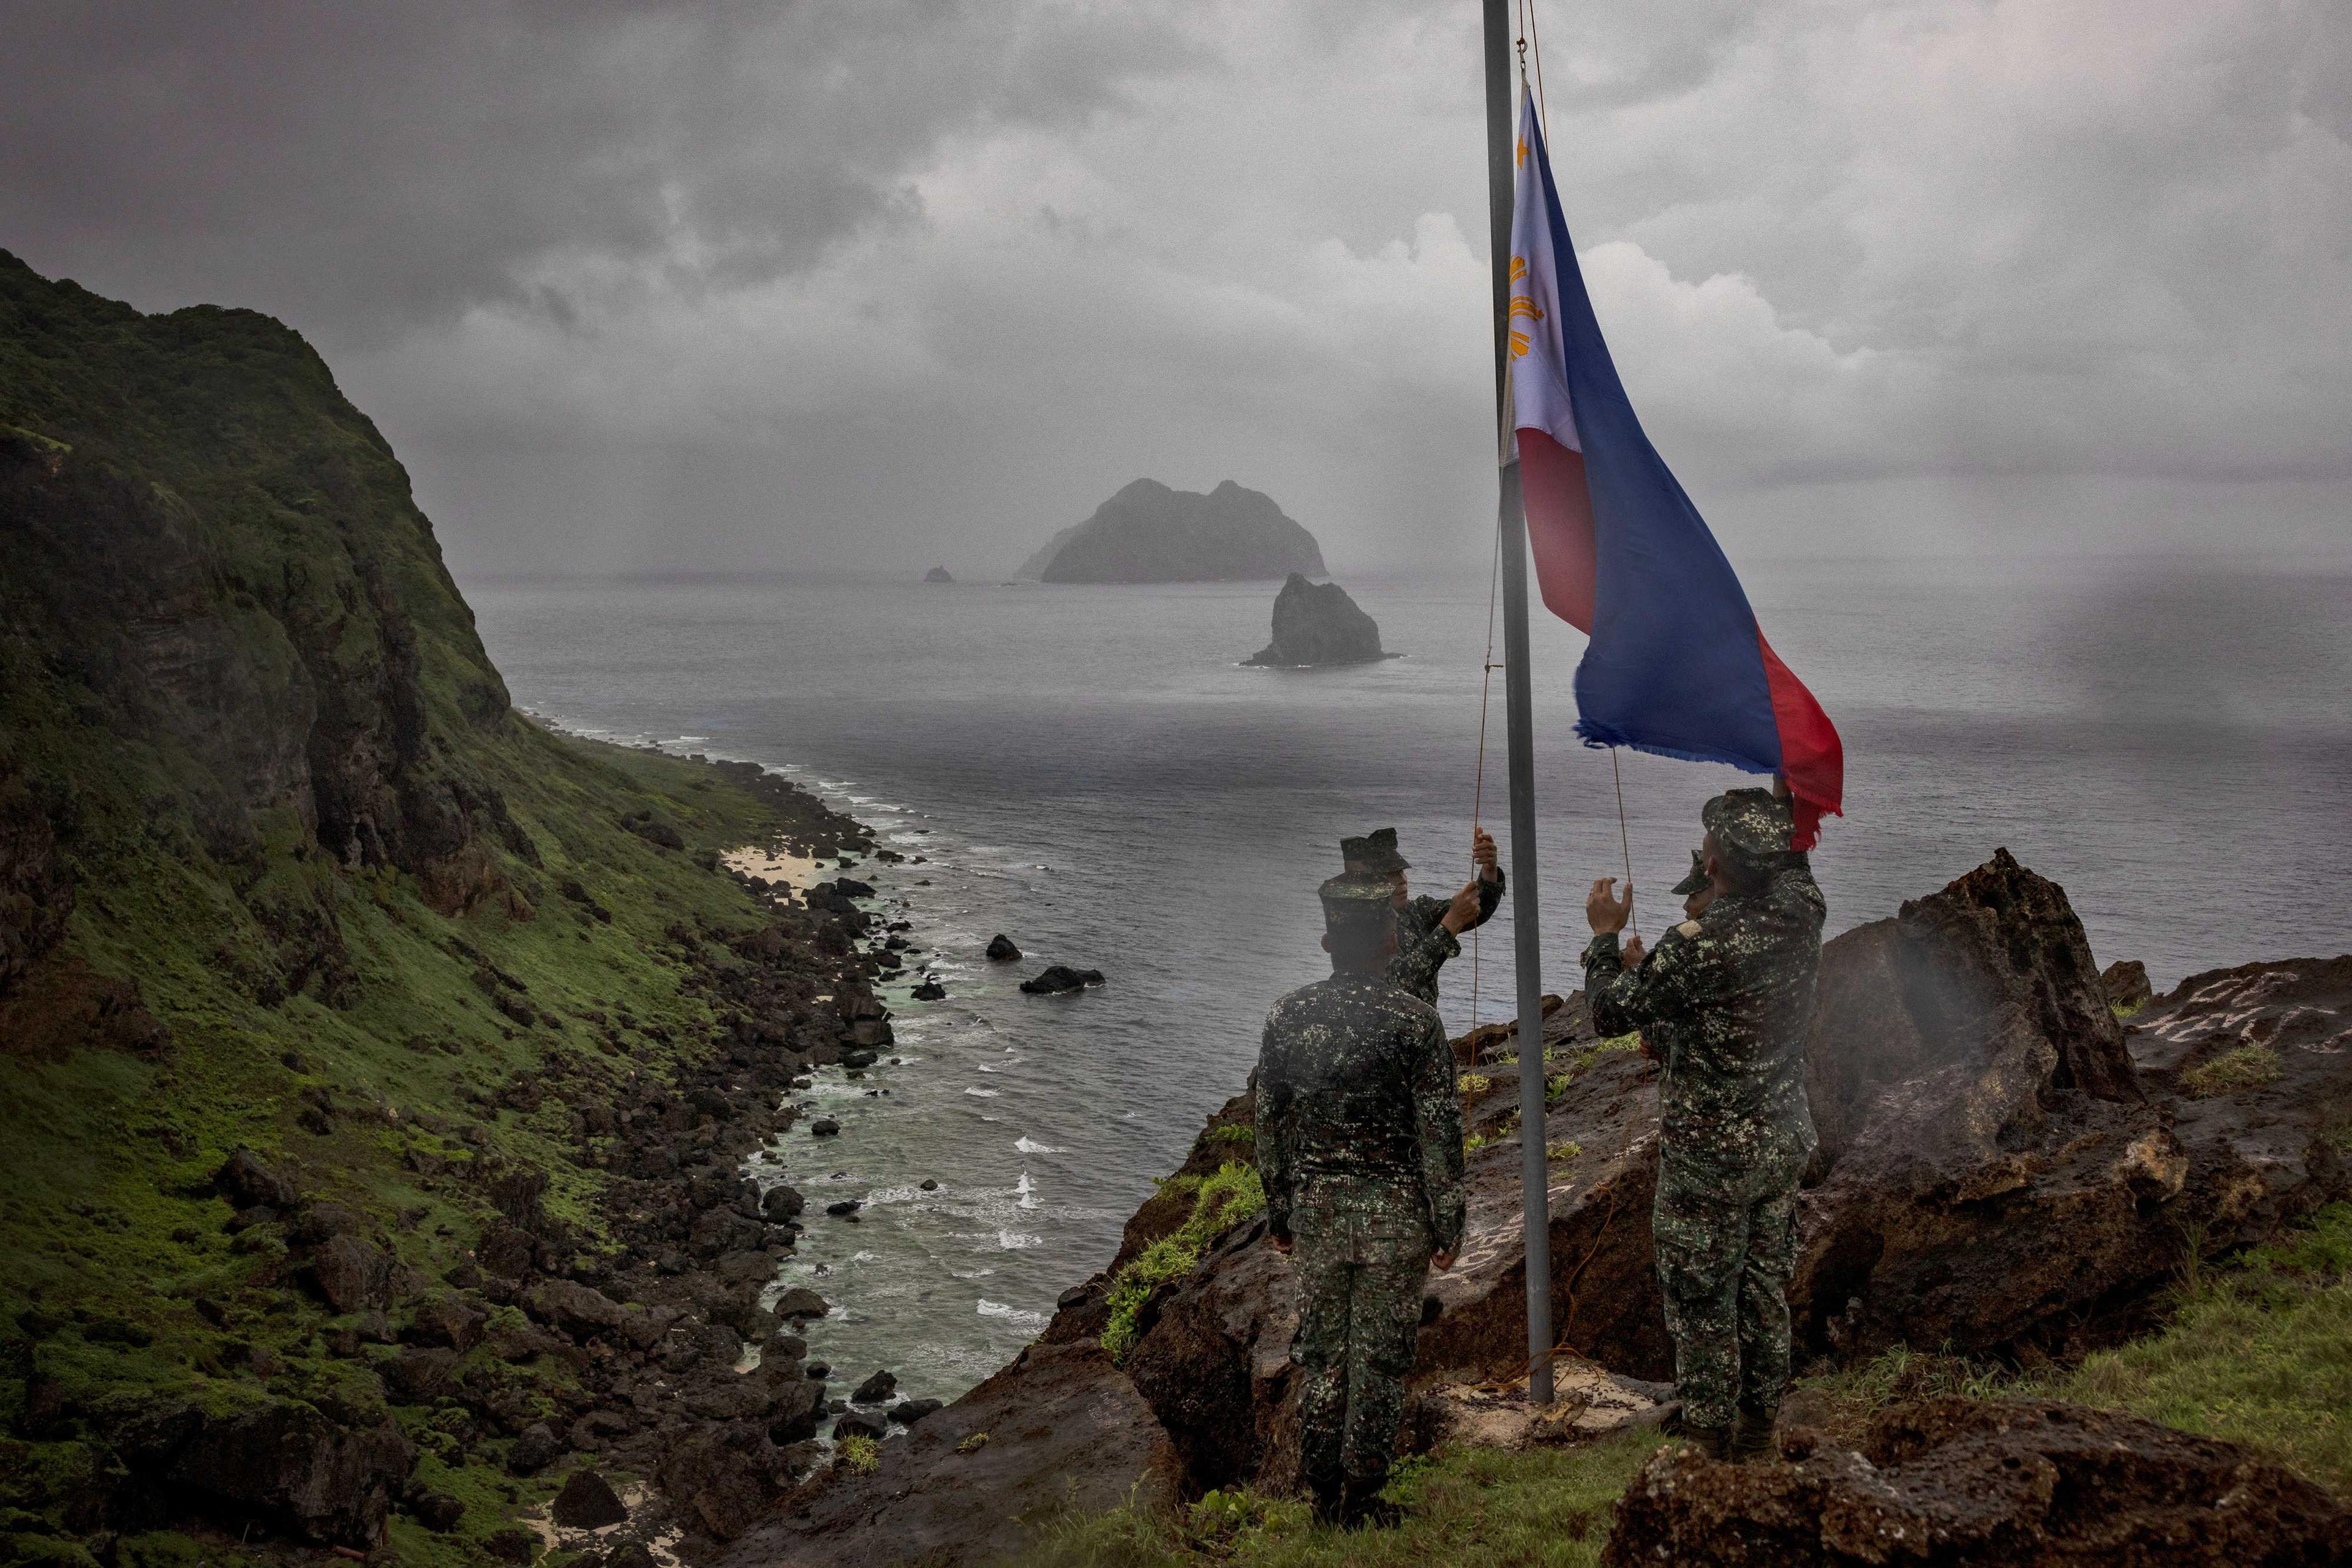 Filipino soldiers take part in a flag raising ceremony on Mavulis Island during a trip of the chief of staff of the Armed Forces of the Philippines, in Batanes, Philippines, June 29. Photo: Reuters